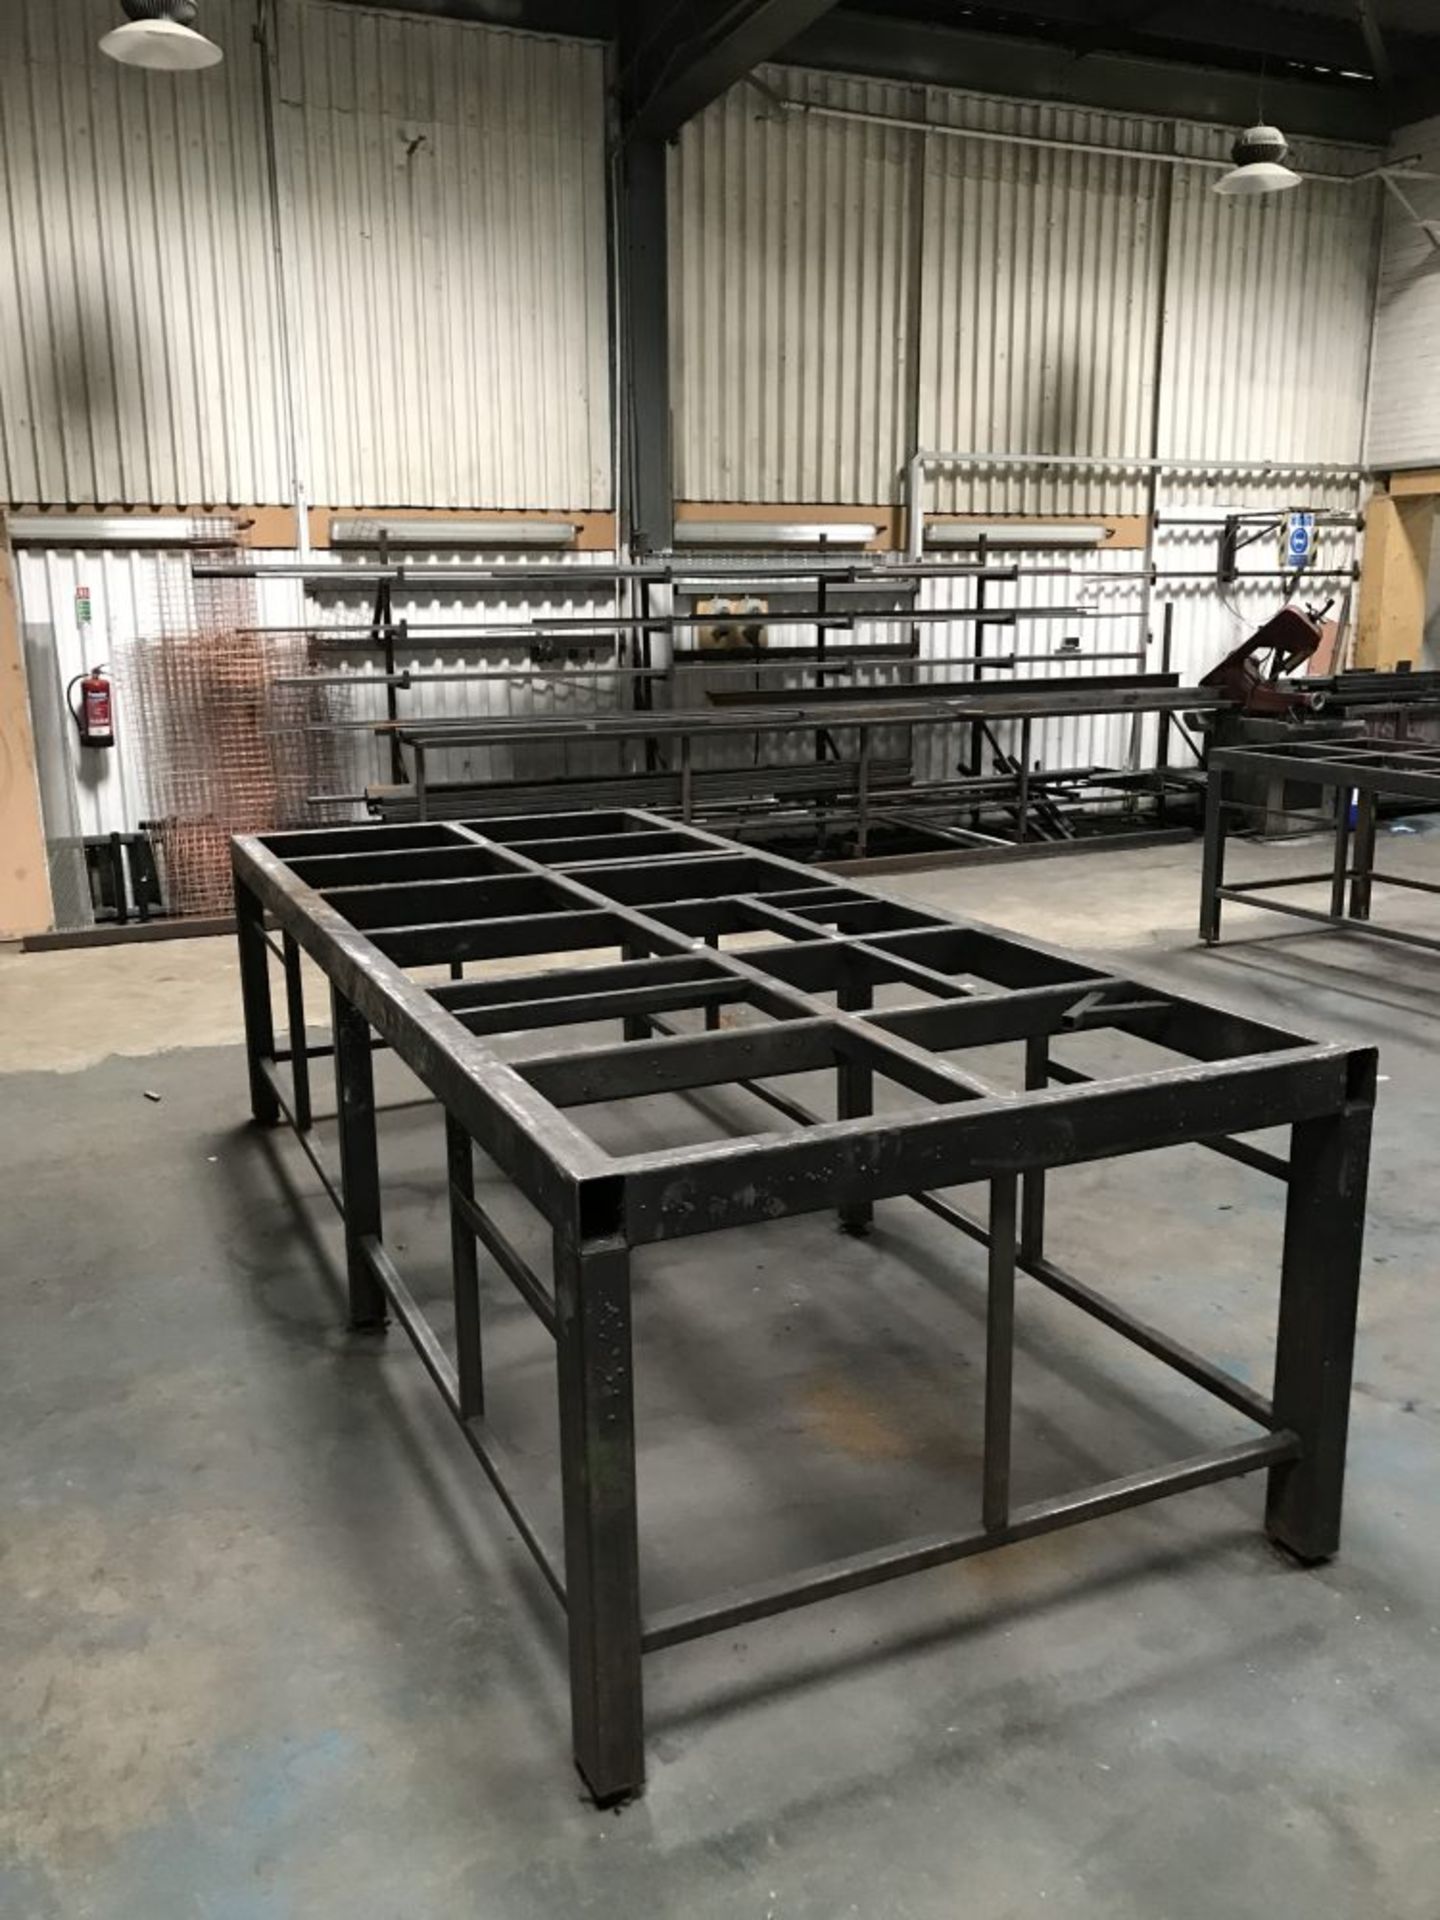 A welding table